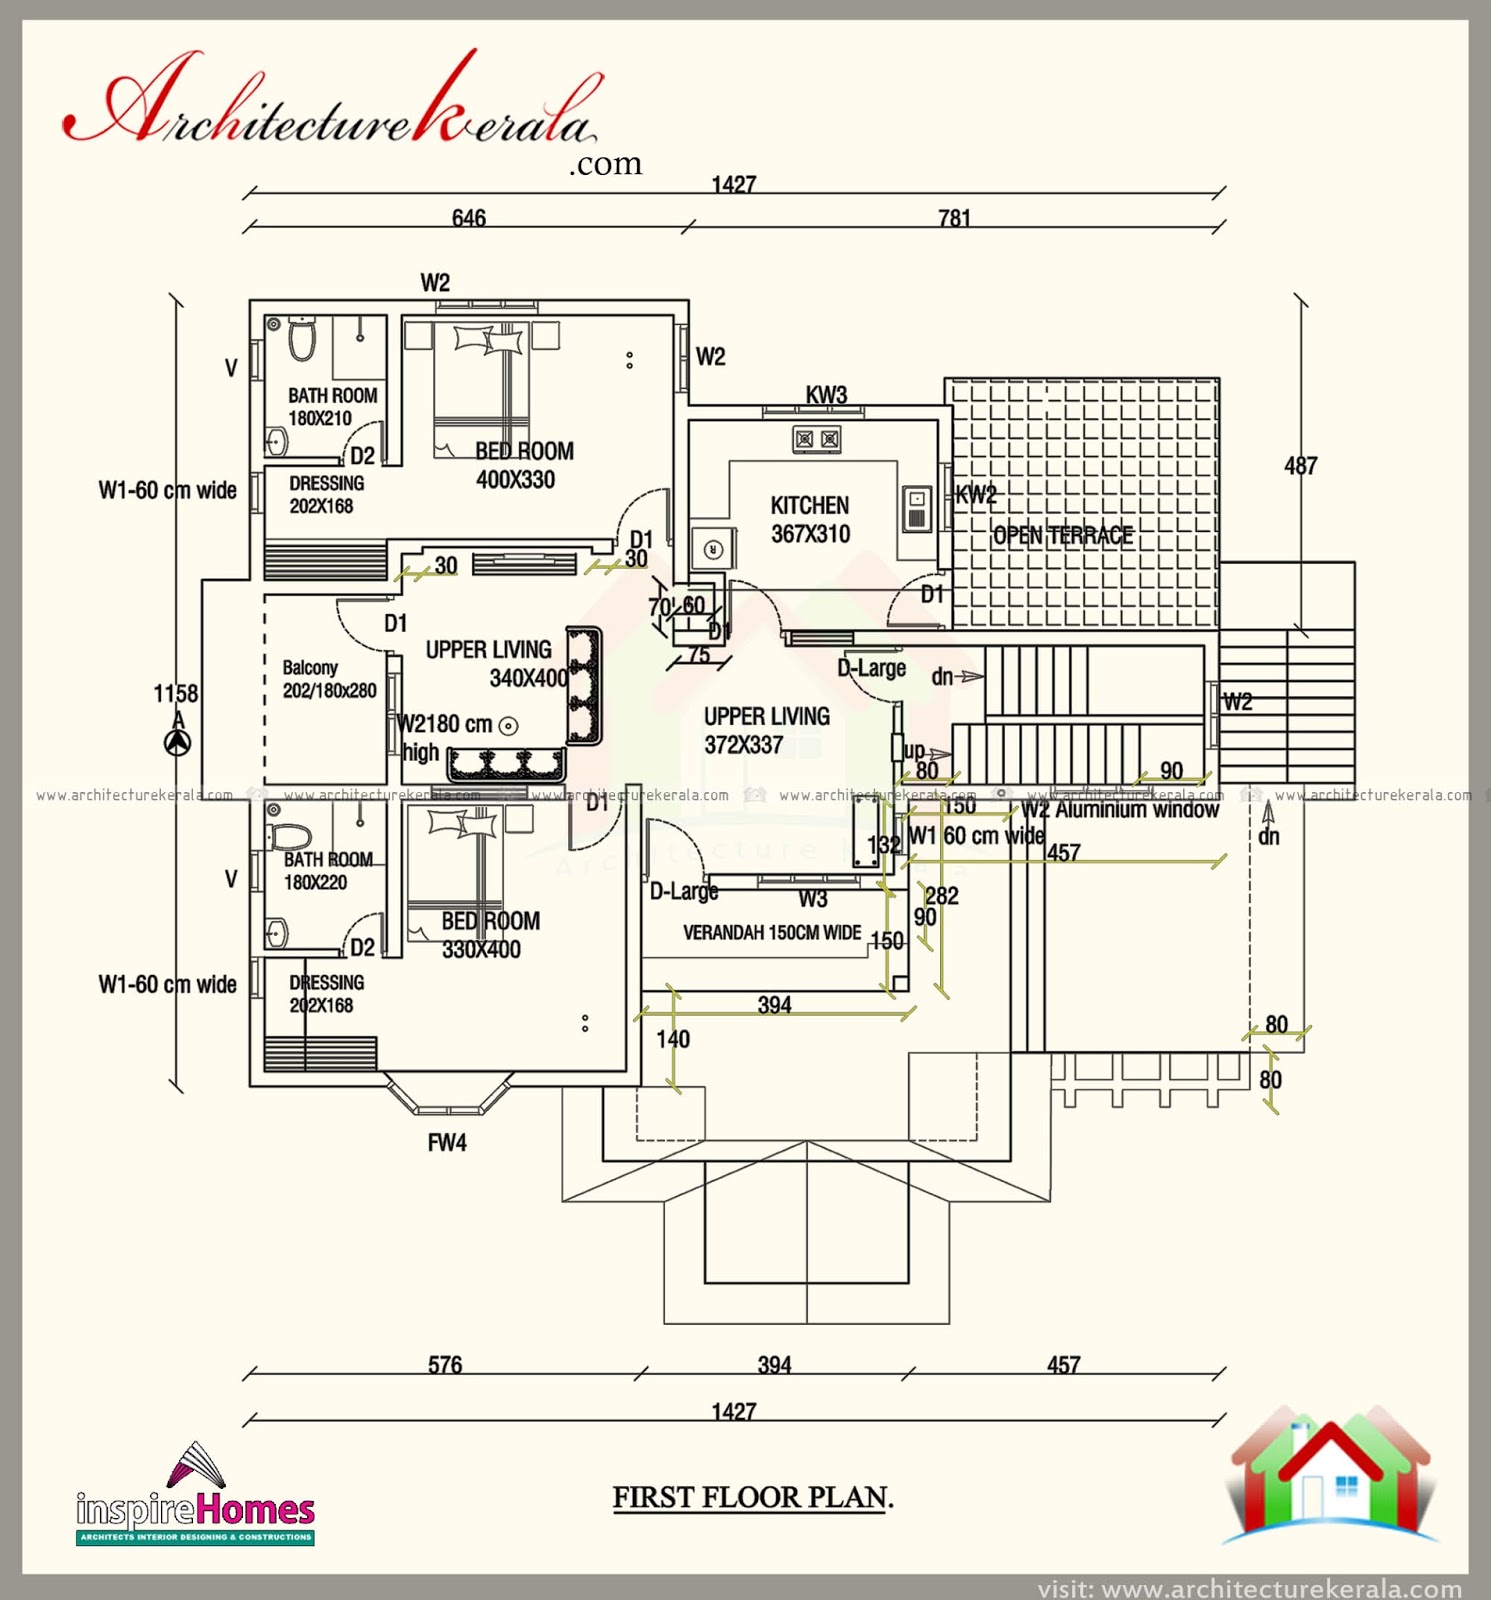  FOUR  BEDROOM  HOUSE  PLAN  AND ELEVATION  ARCHITECTURE KERALA